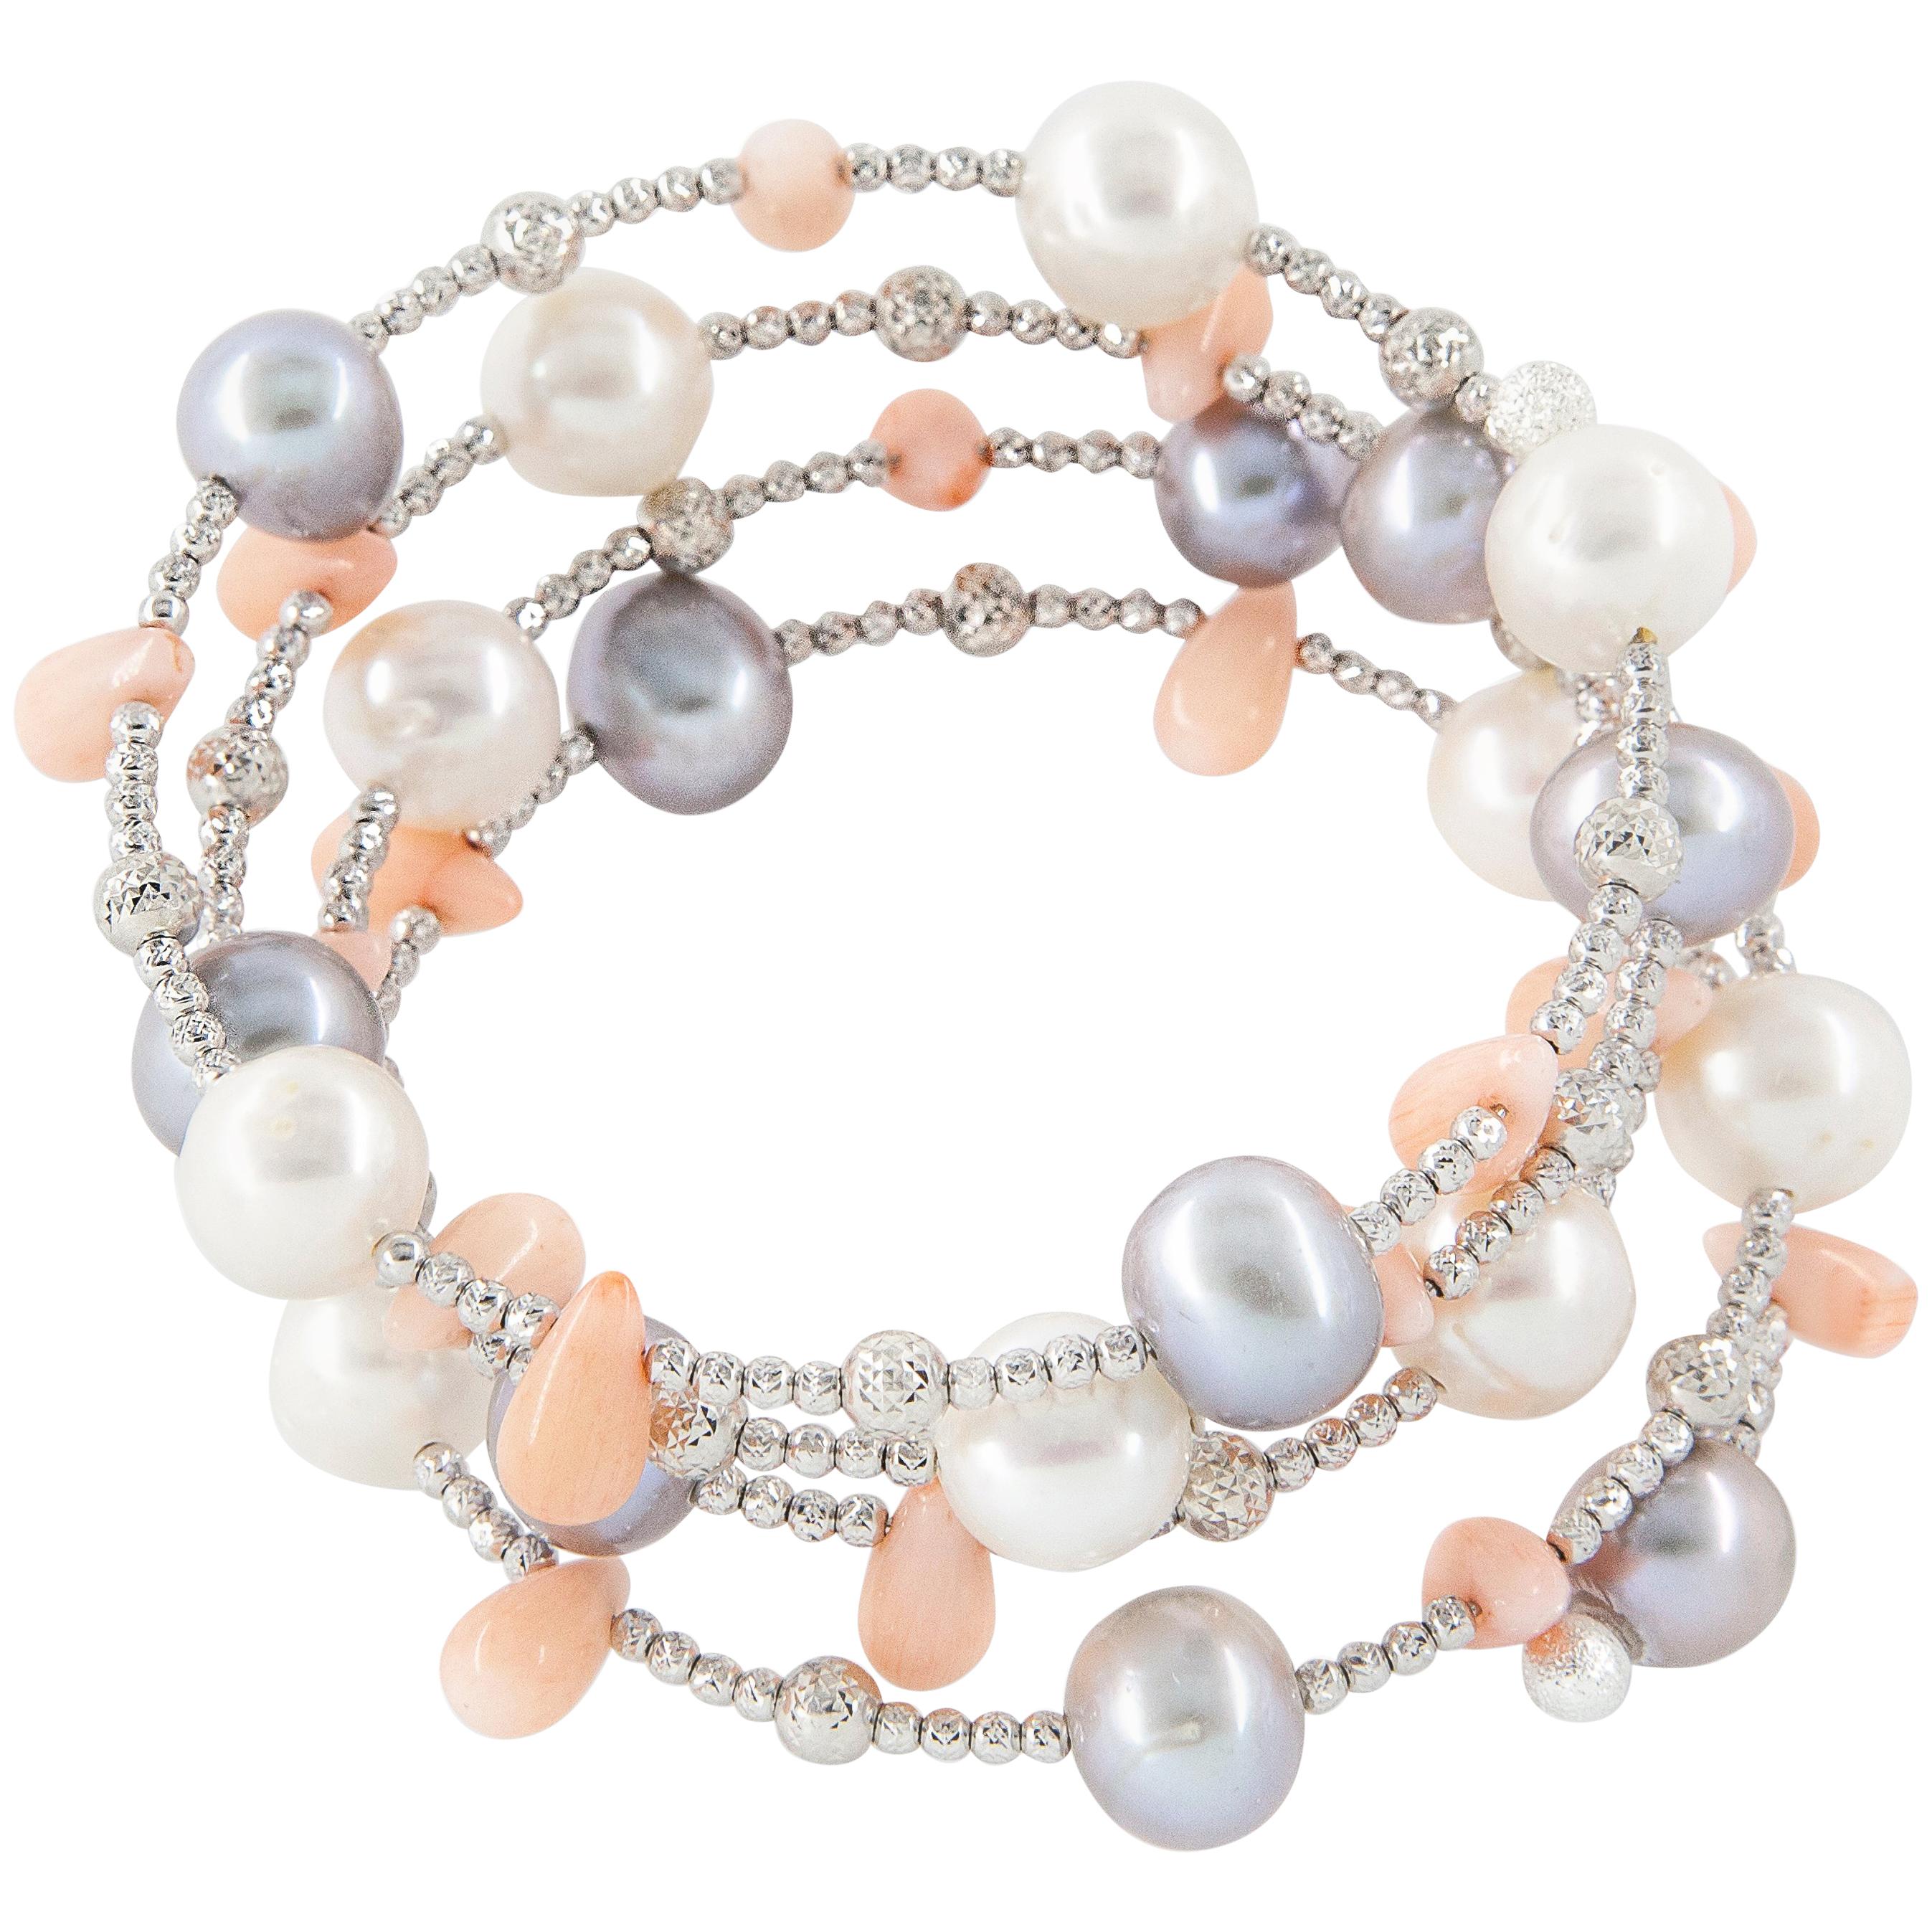 Grey and White Pearl Spiral Bracelet with Coral Beads and White Gold Beads For Sale